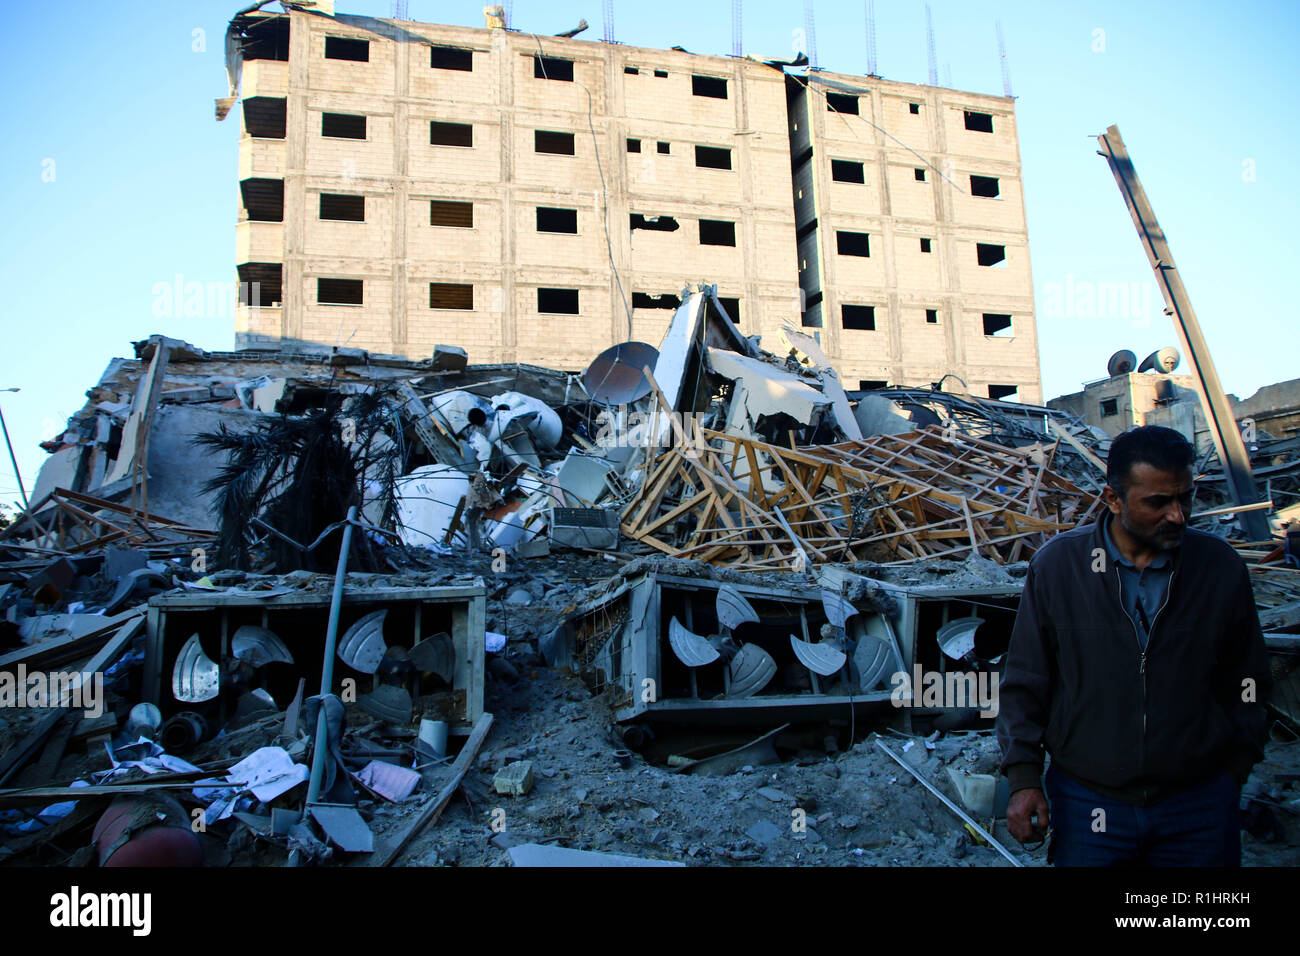 A man seen standing next to the rubble site of a building which was bombed by the Zionist occupation planes during the raids in the Gaza Strip. Stock Photo